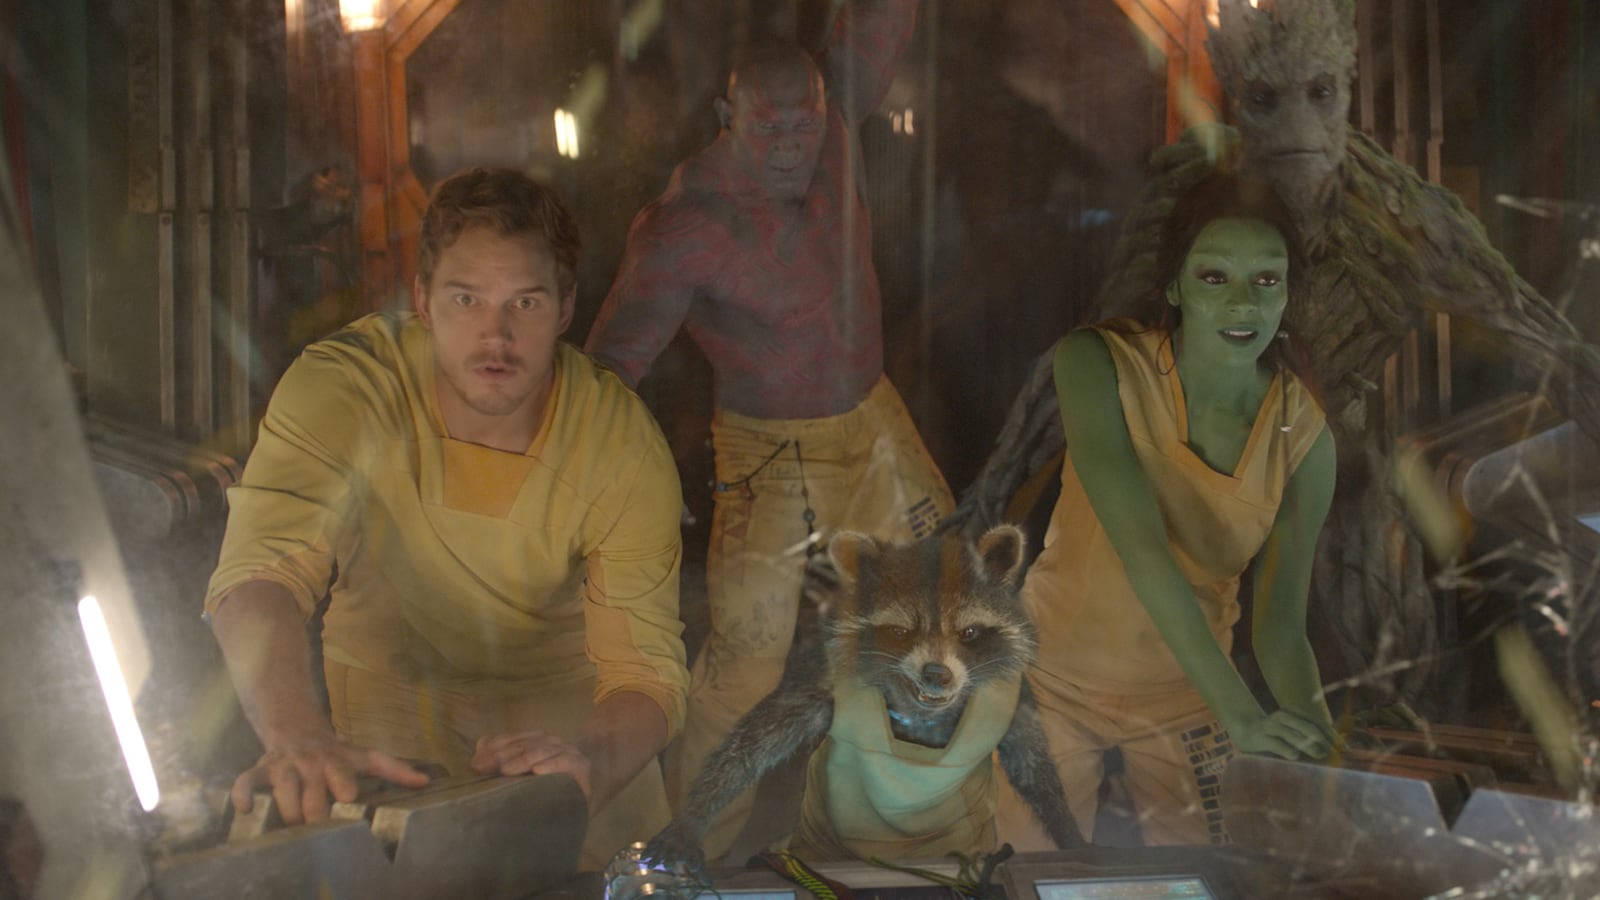 guardians-of-the-galaxy-2014